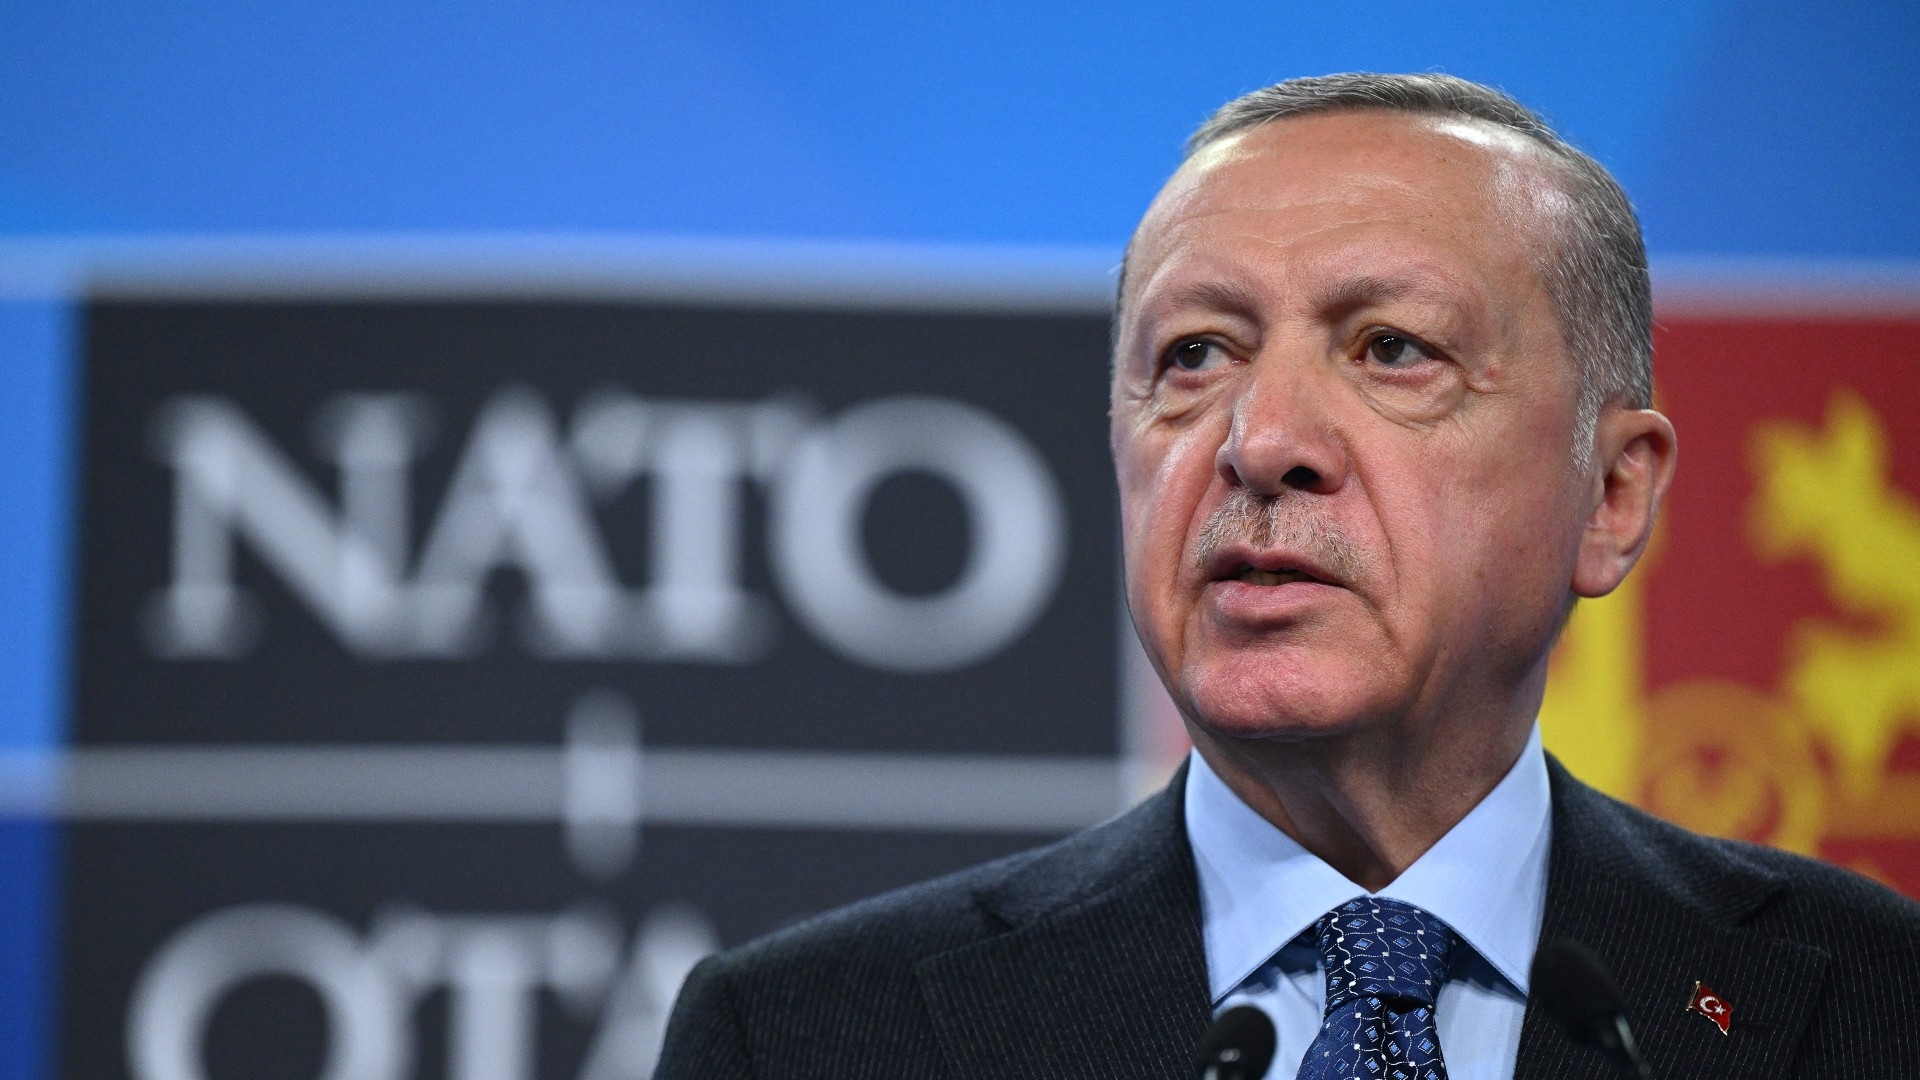 Turkey's President Recep Tayyip Erdogan addresses media during a news conference at a Nato summit on 30 June, 2022 (AFP)